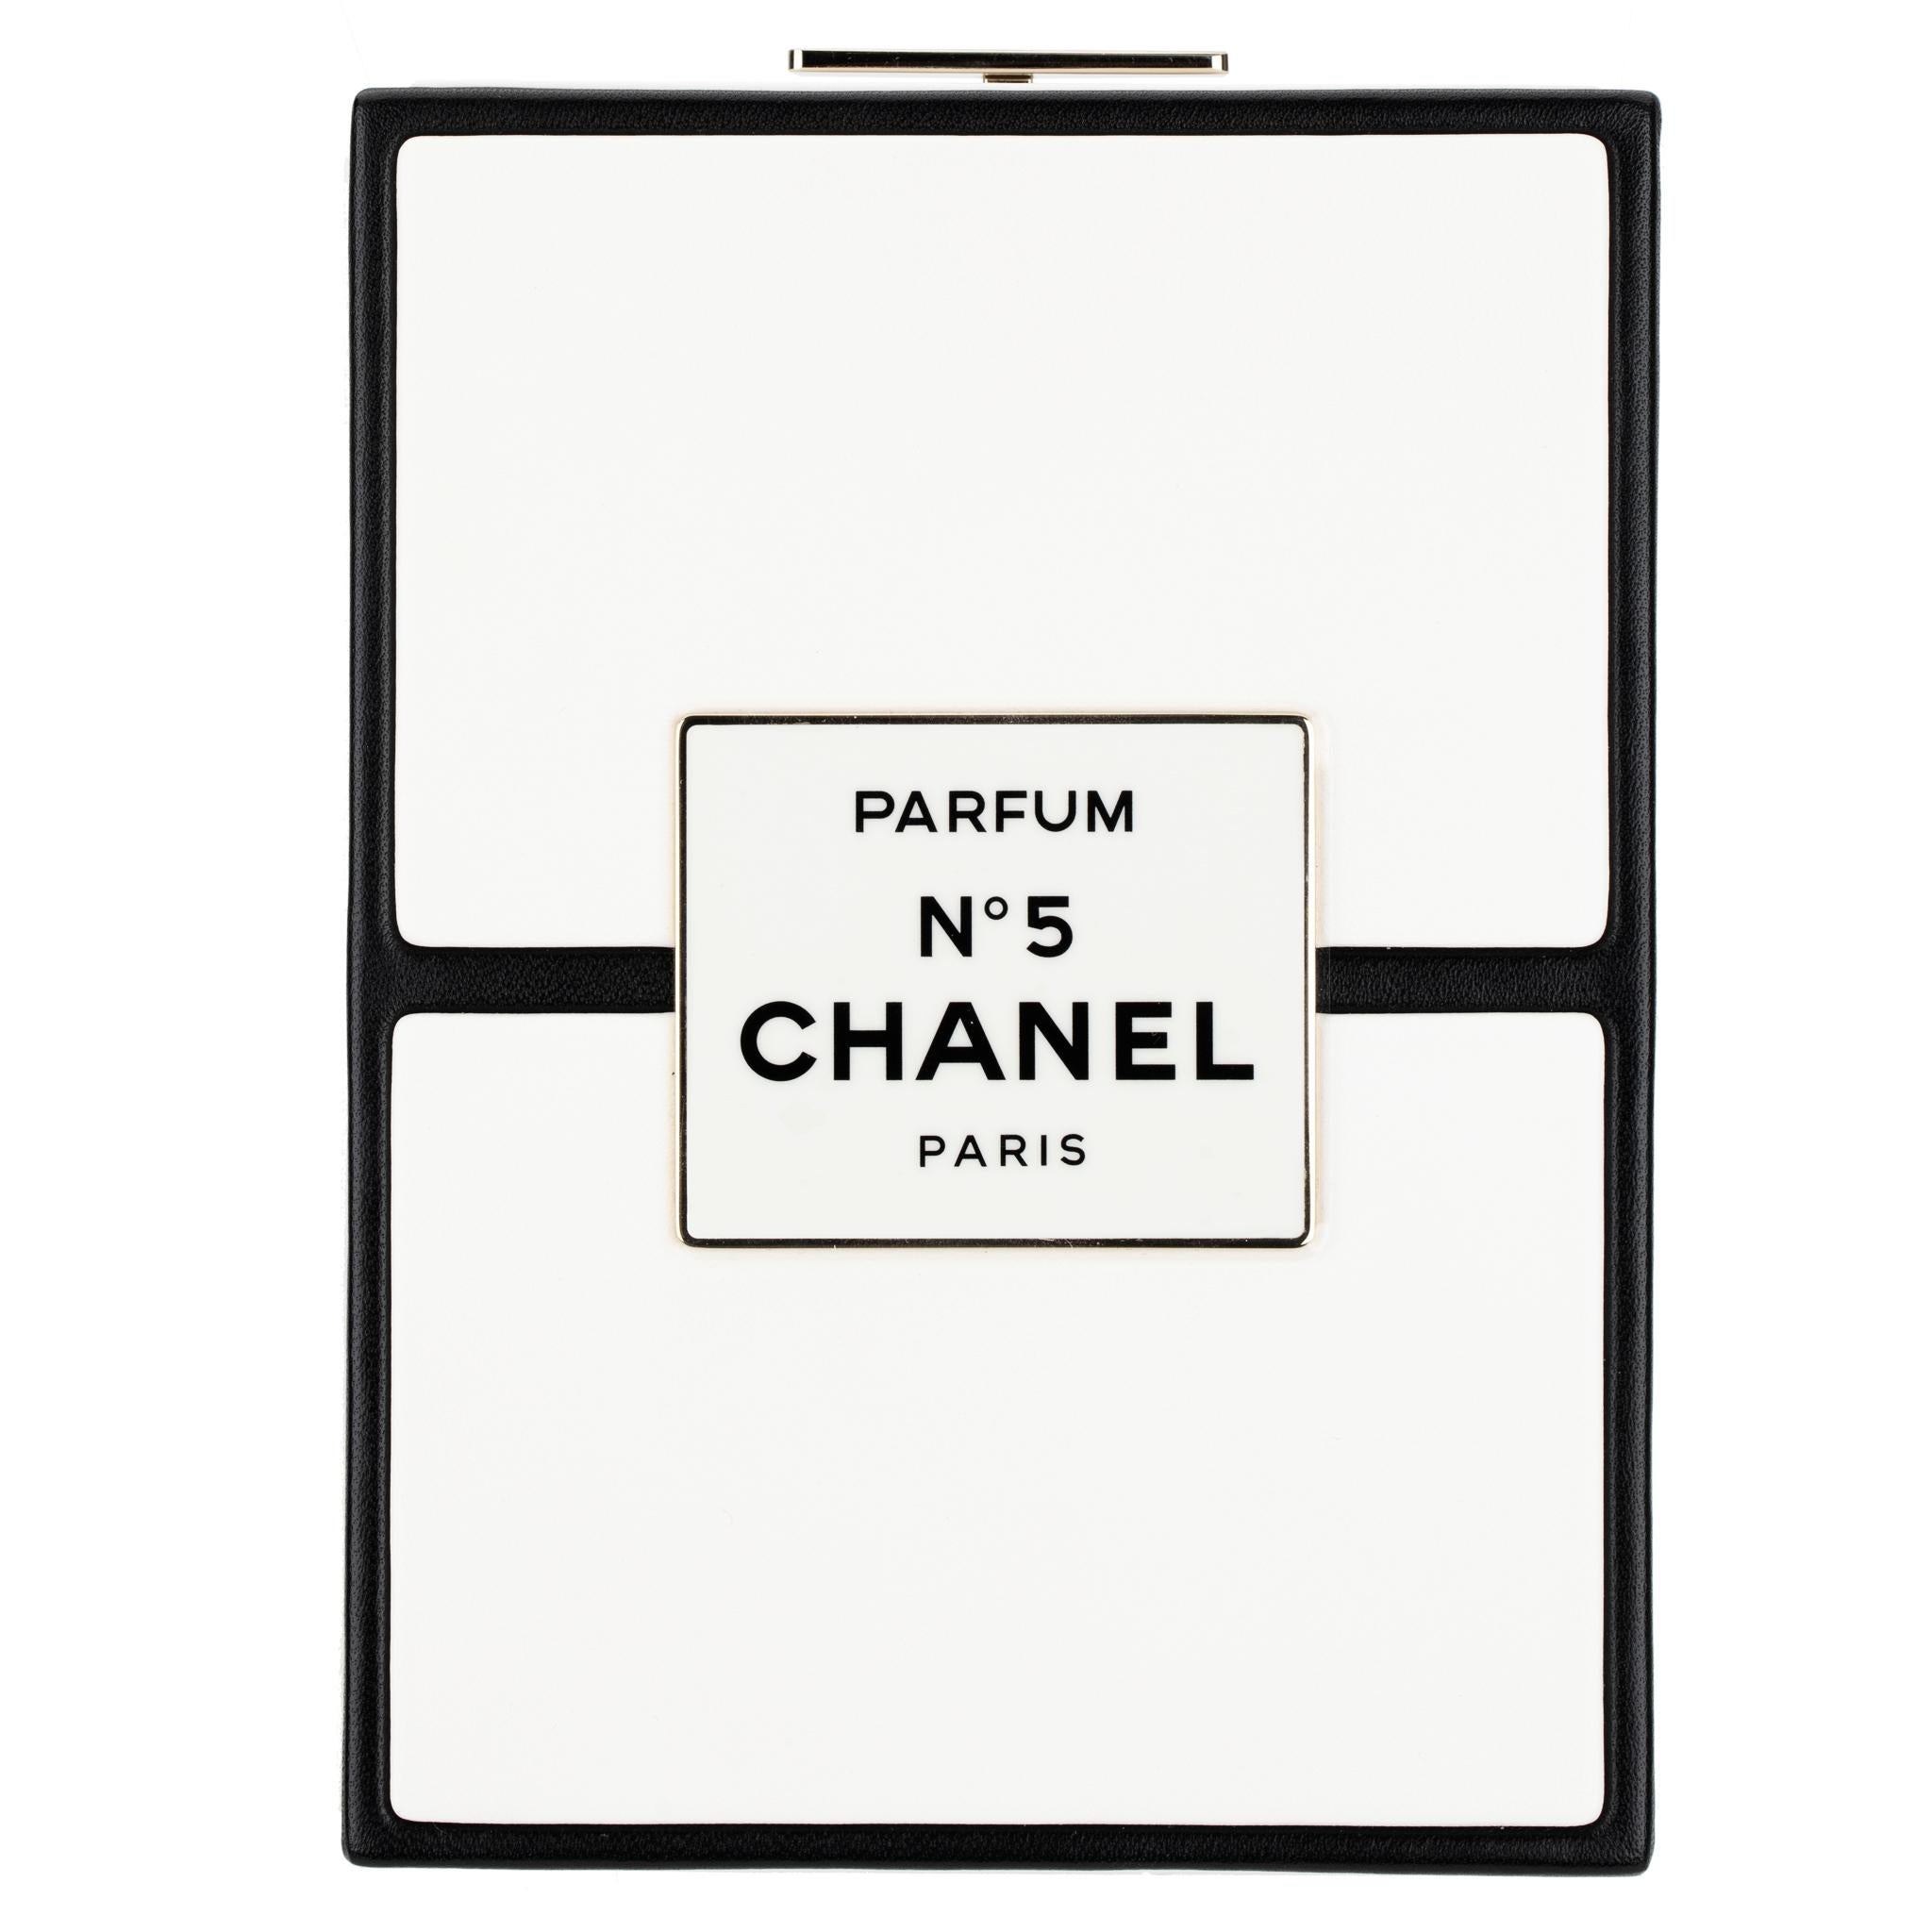 If there’s any perfect evening accessory that resembles Chanel, it’s the Chanel No.5 Parfum Box Evening Clutch.

Created for the Spring Summer 2021 Collection Act II, This stunning evening clutch pays homage to Chanel’s most infamous parfum “Chanel